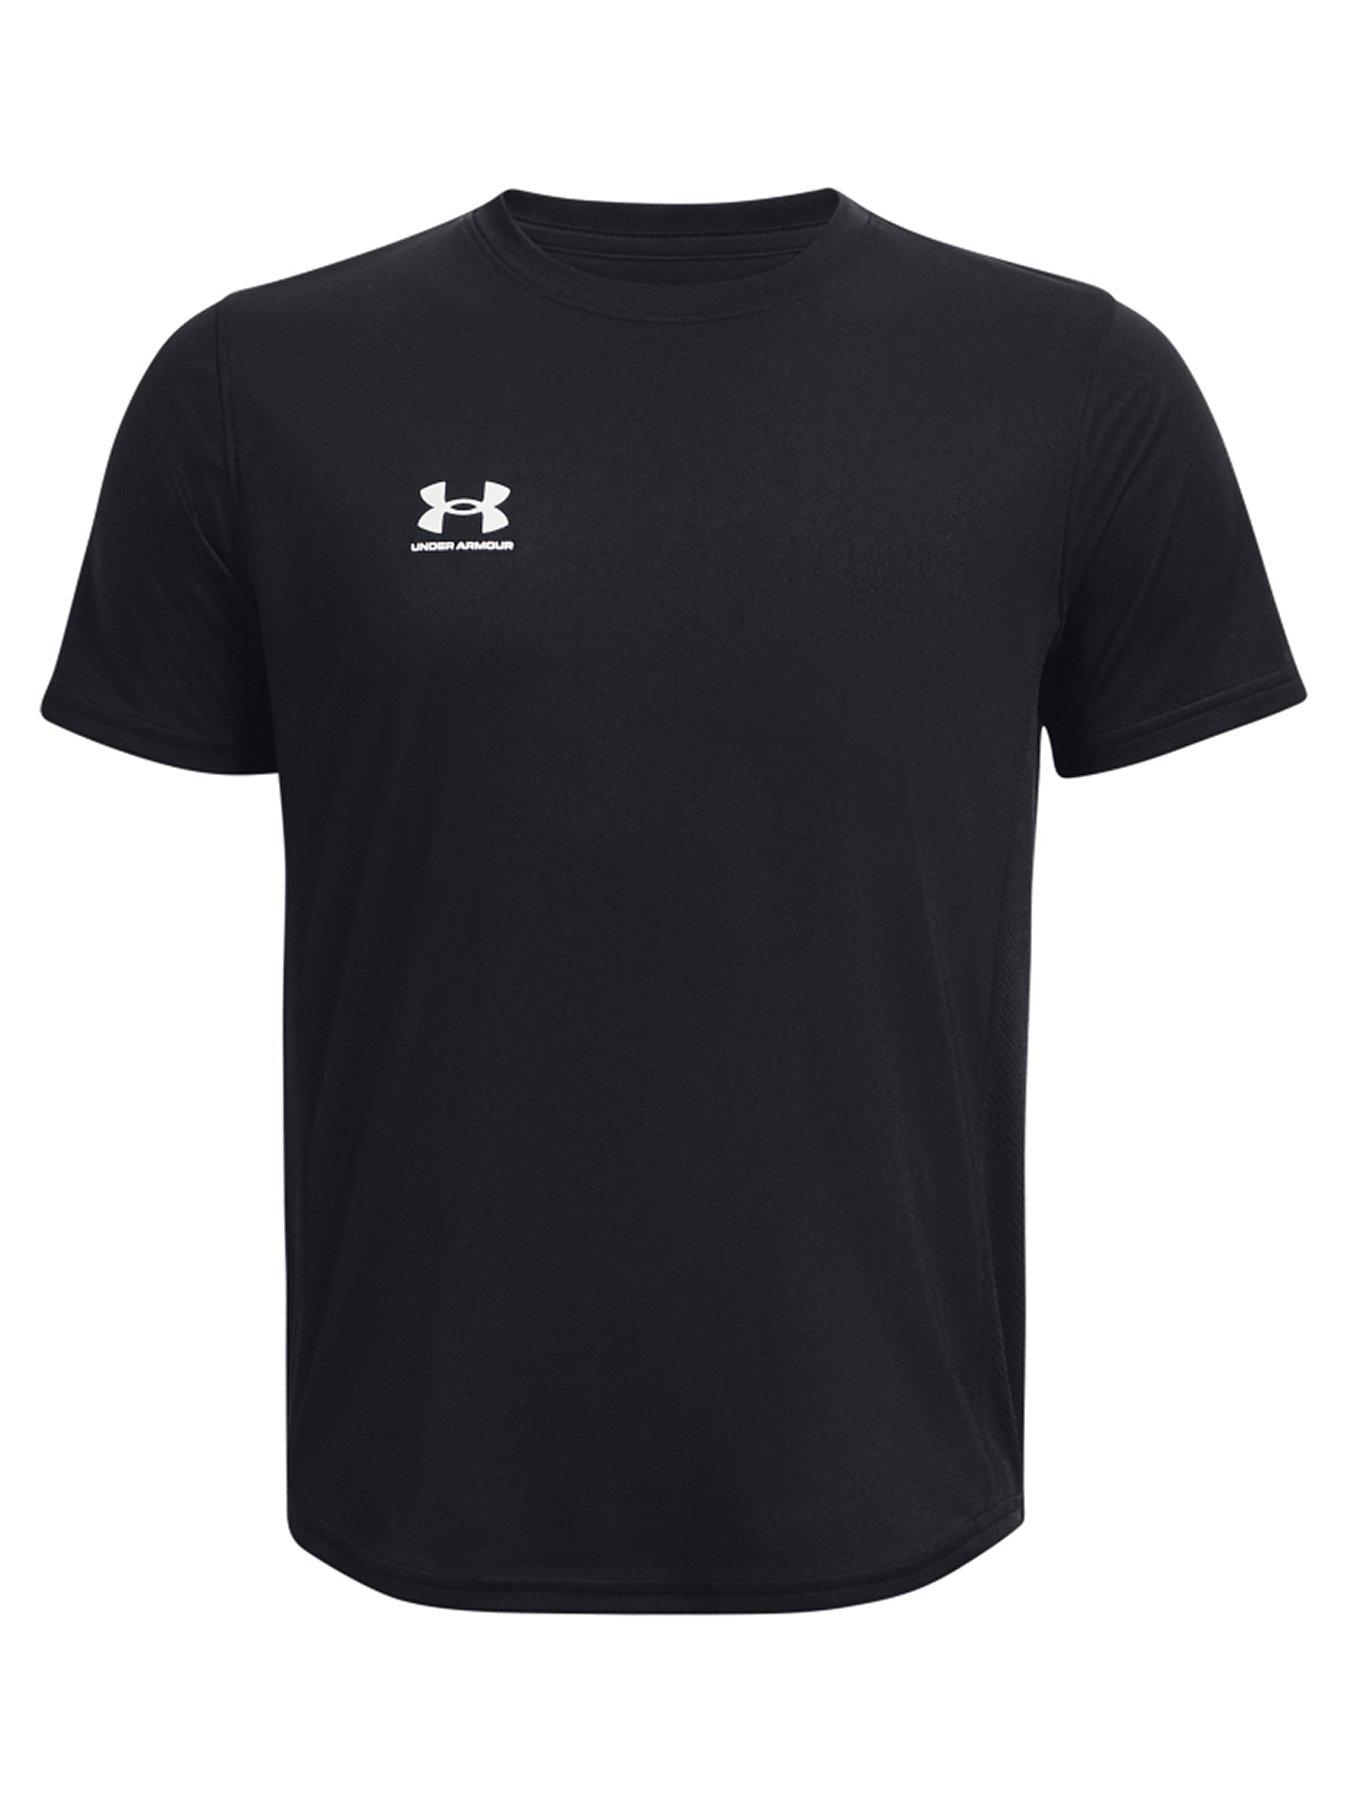 Under Armour 100% Polyester Black Active T-Shirt Size XL - 37% off